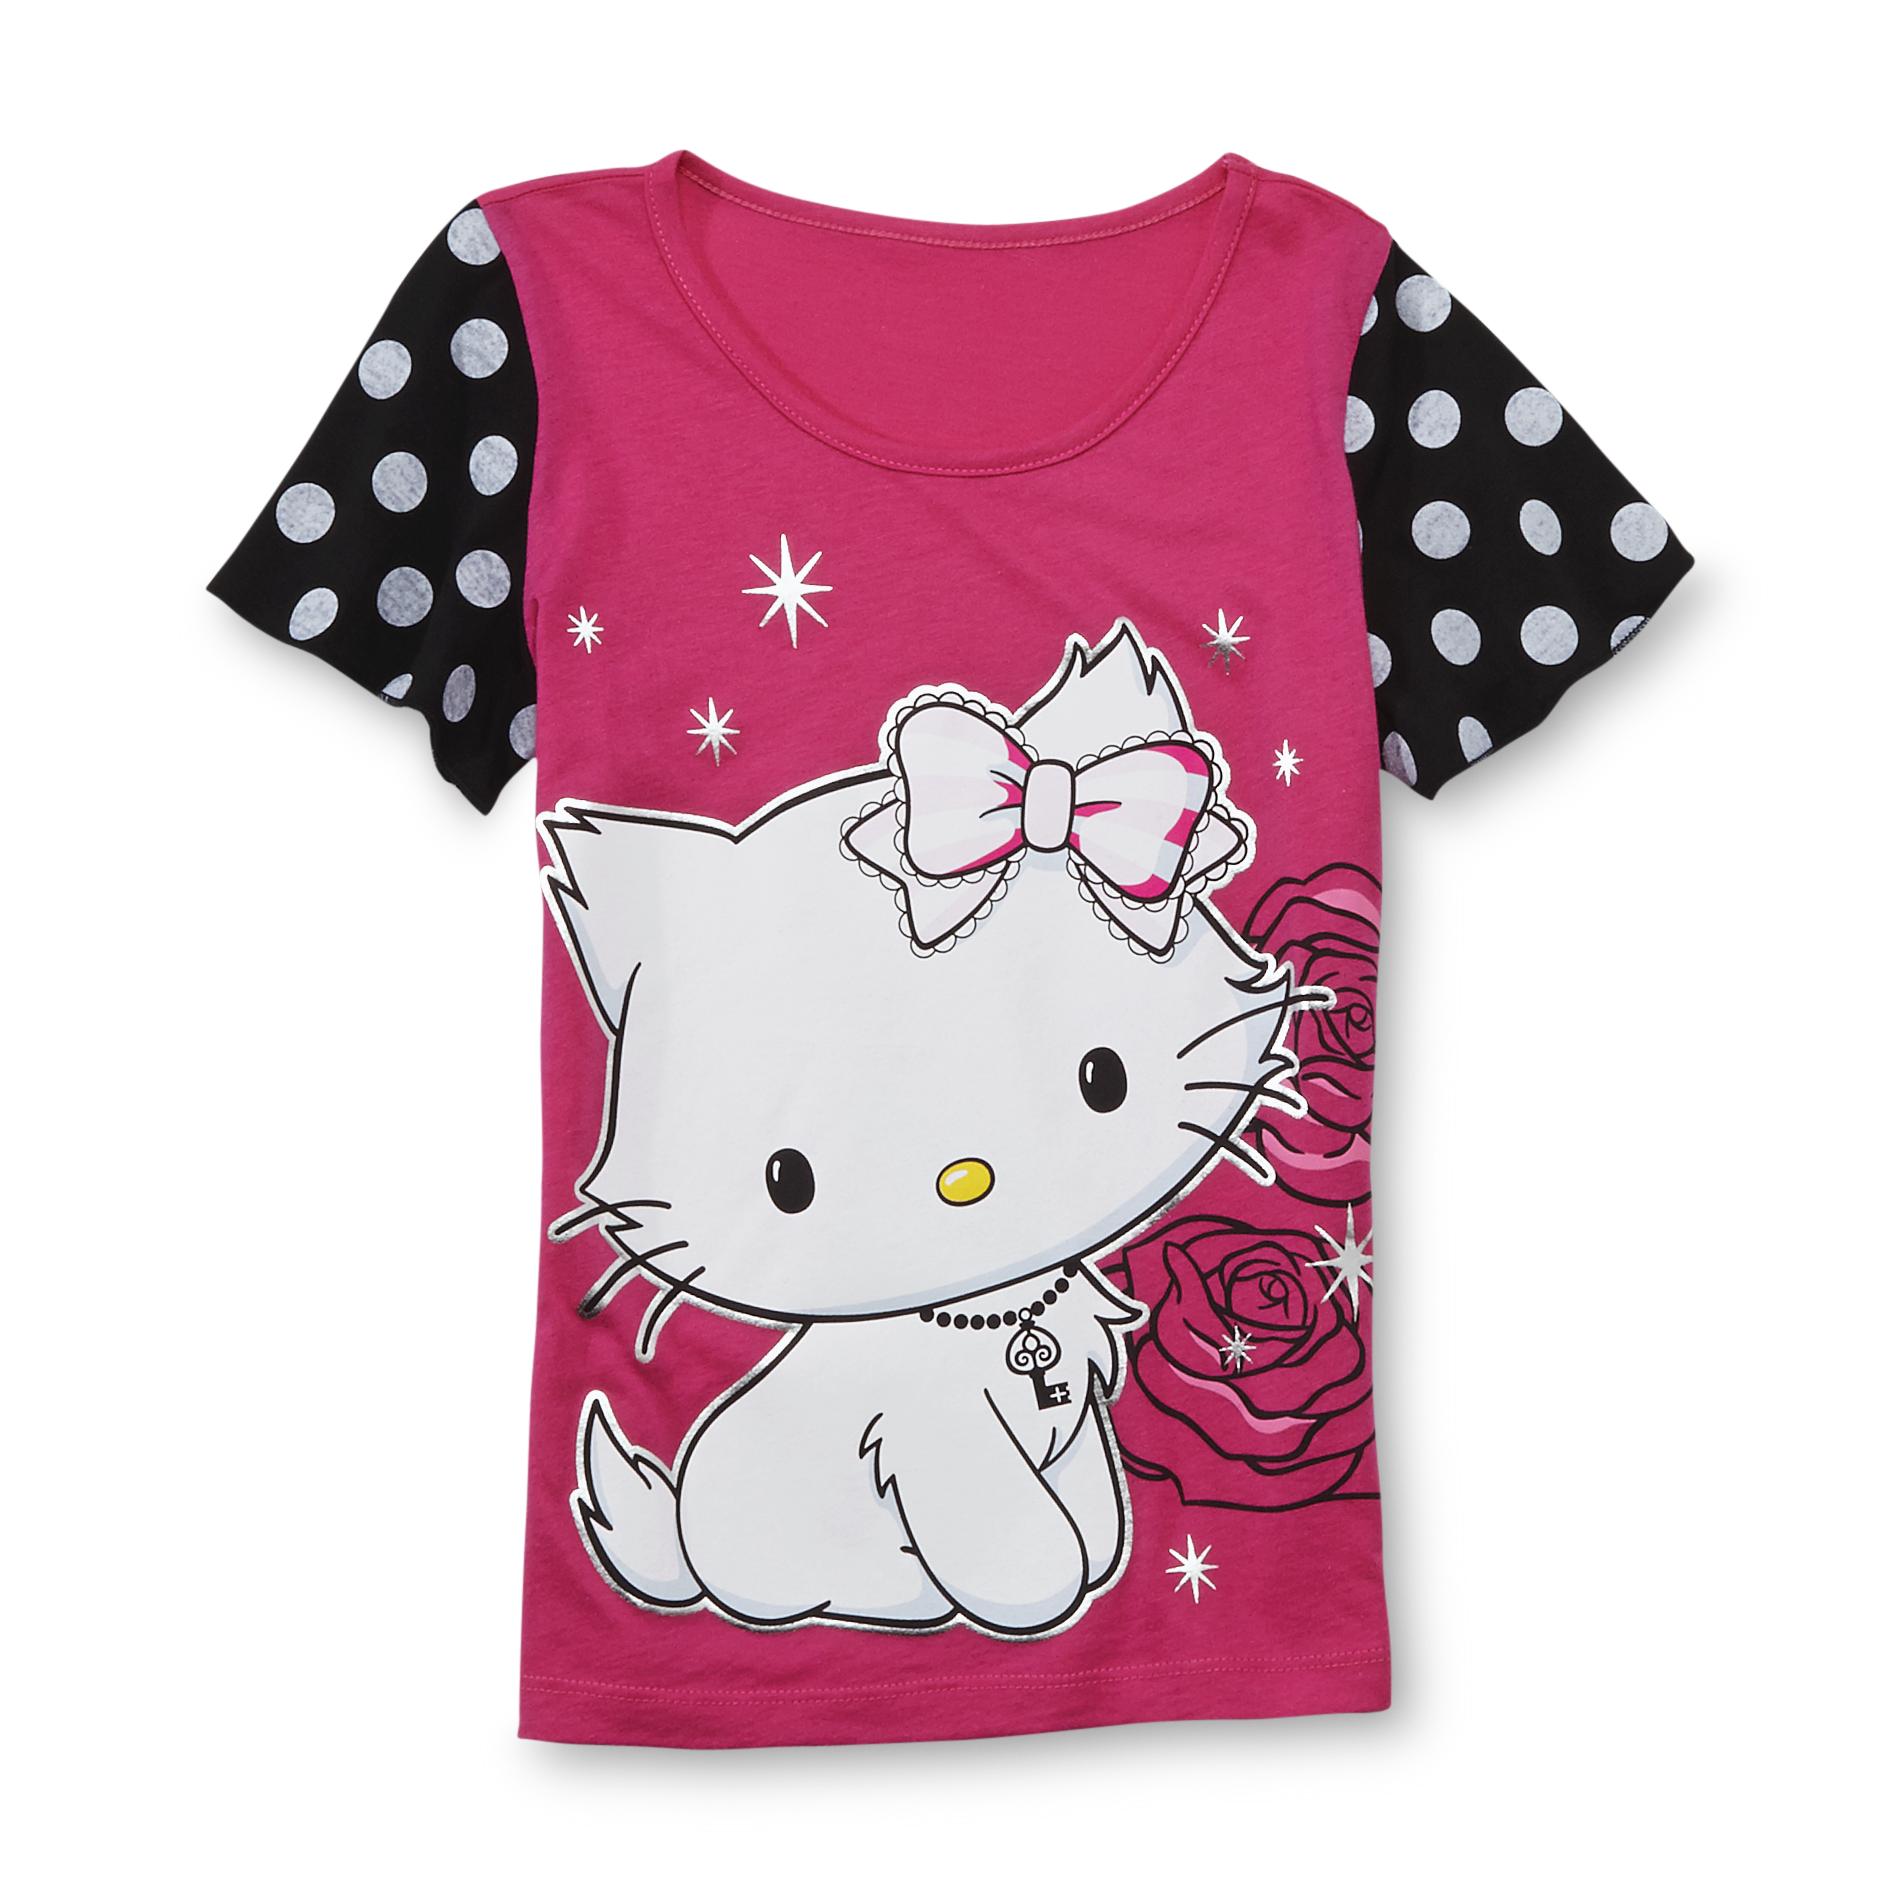 Hello Kitty Girl's Graphic T-Shirt - Charmmy Kitty